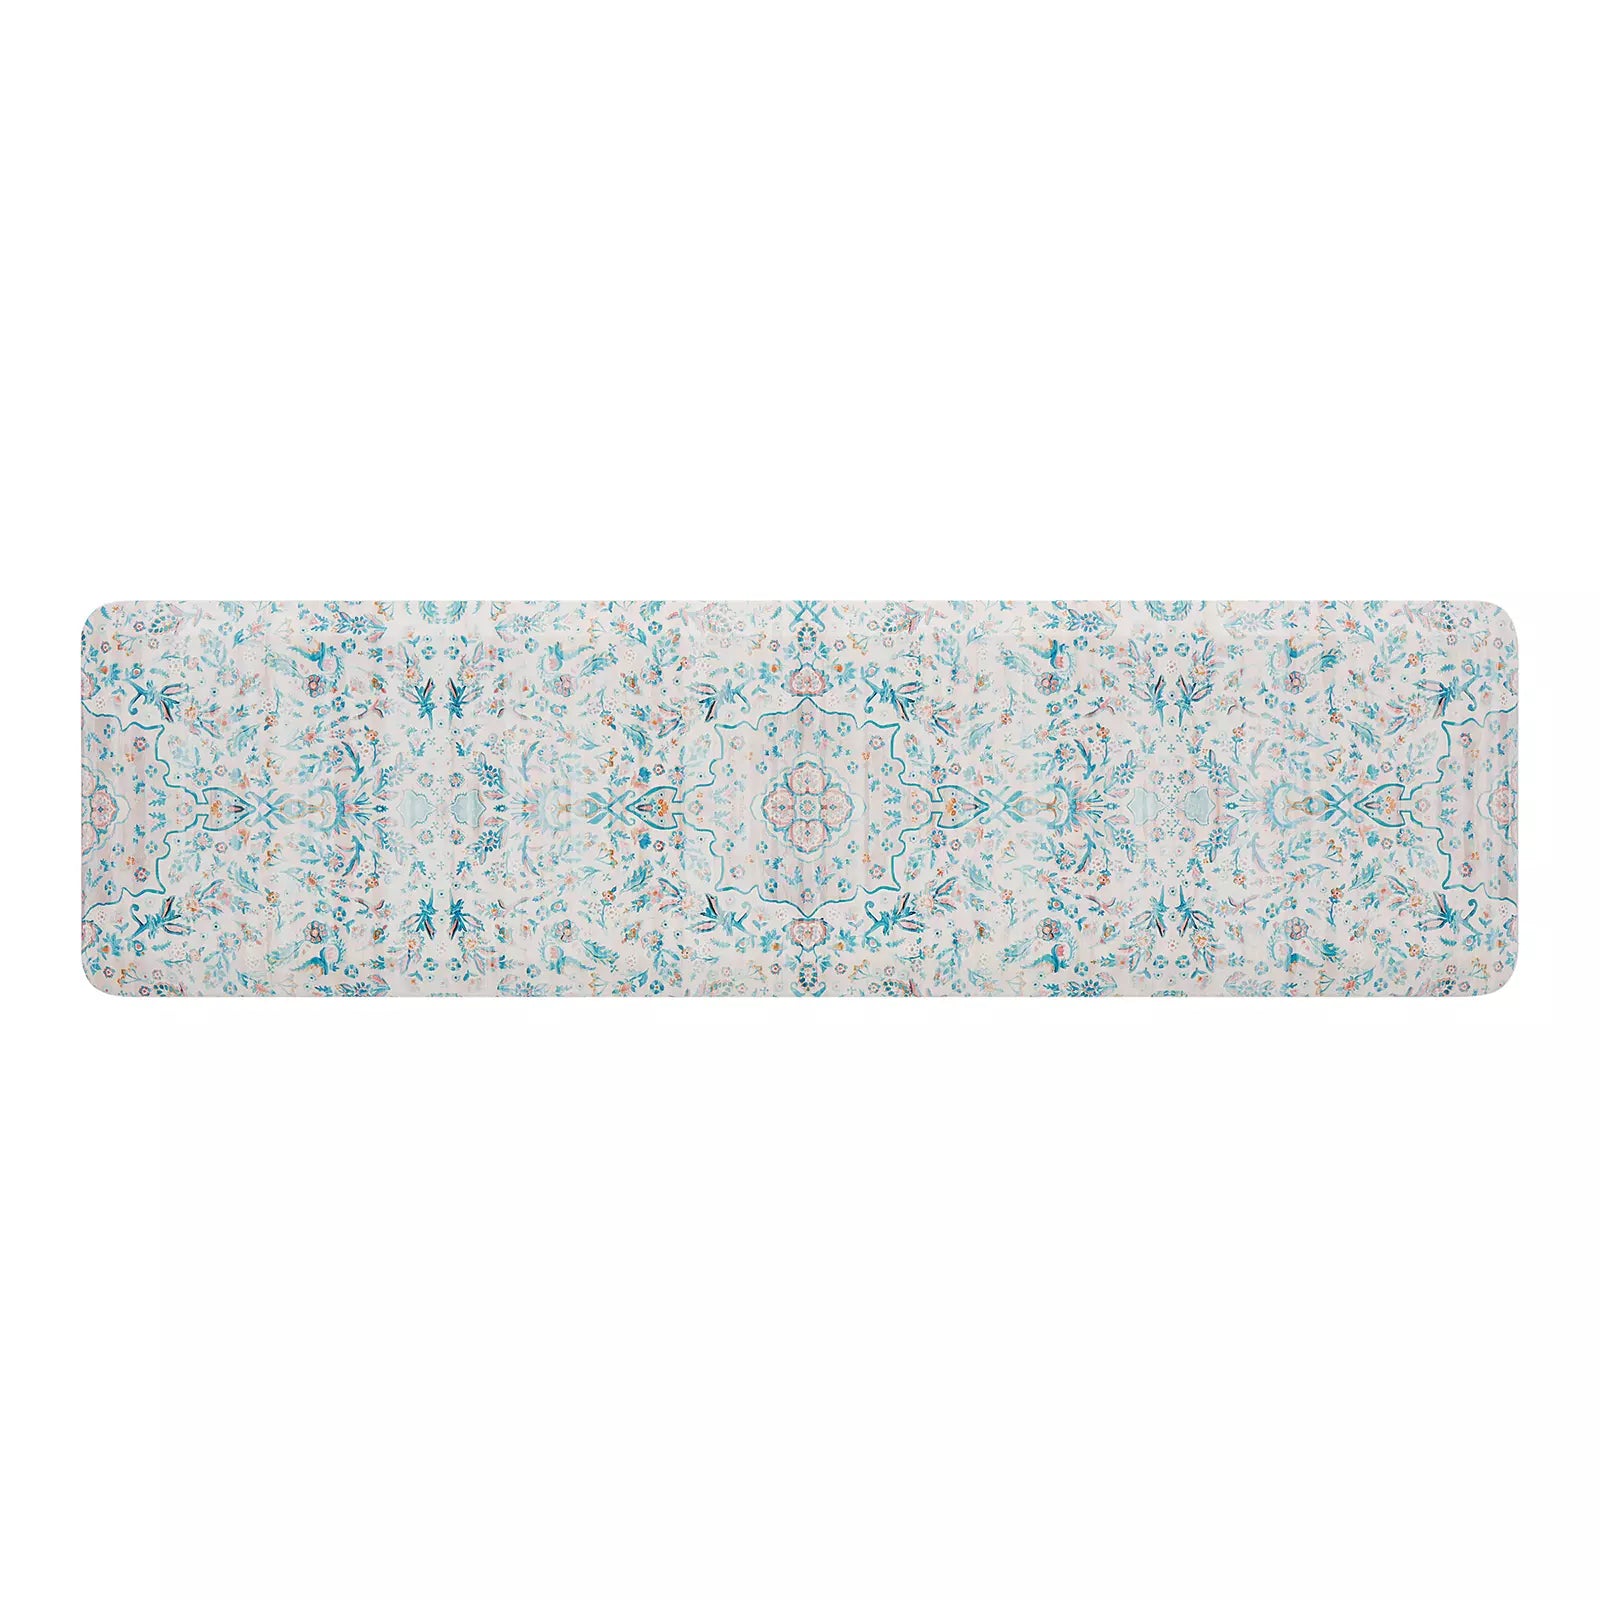 Emile Pale Aqua Muted Blue Pink Floral Boho Standing Mat shown in size 20x72